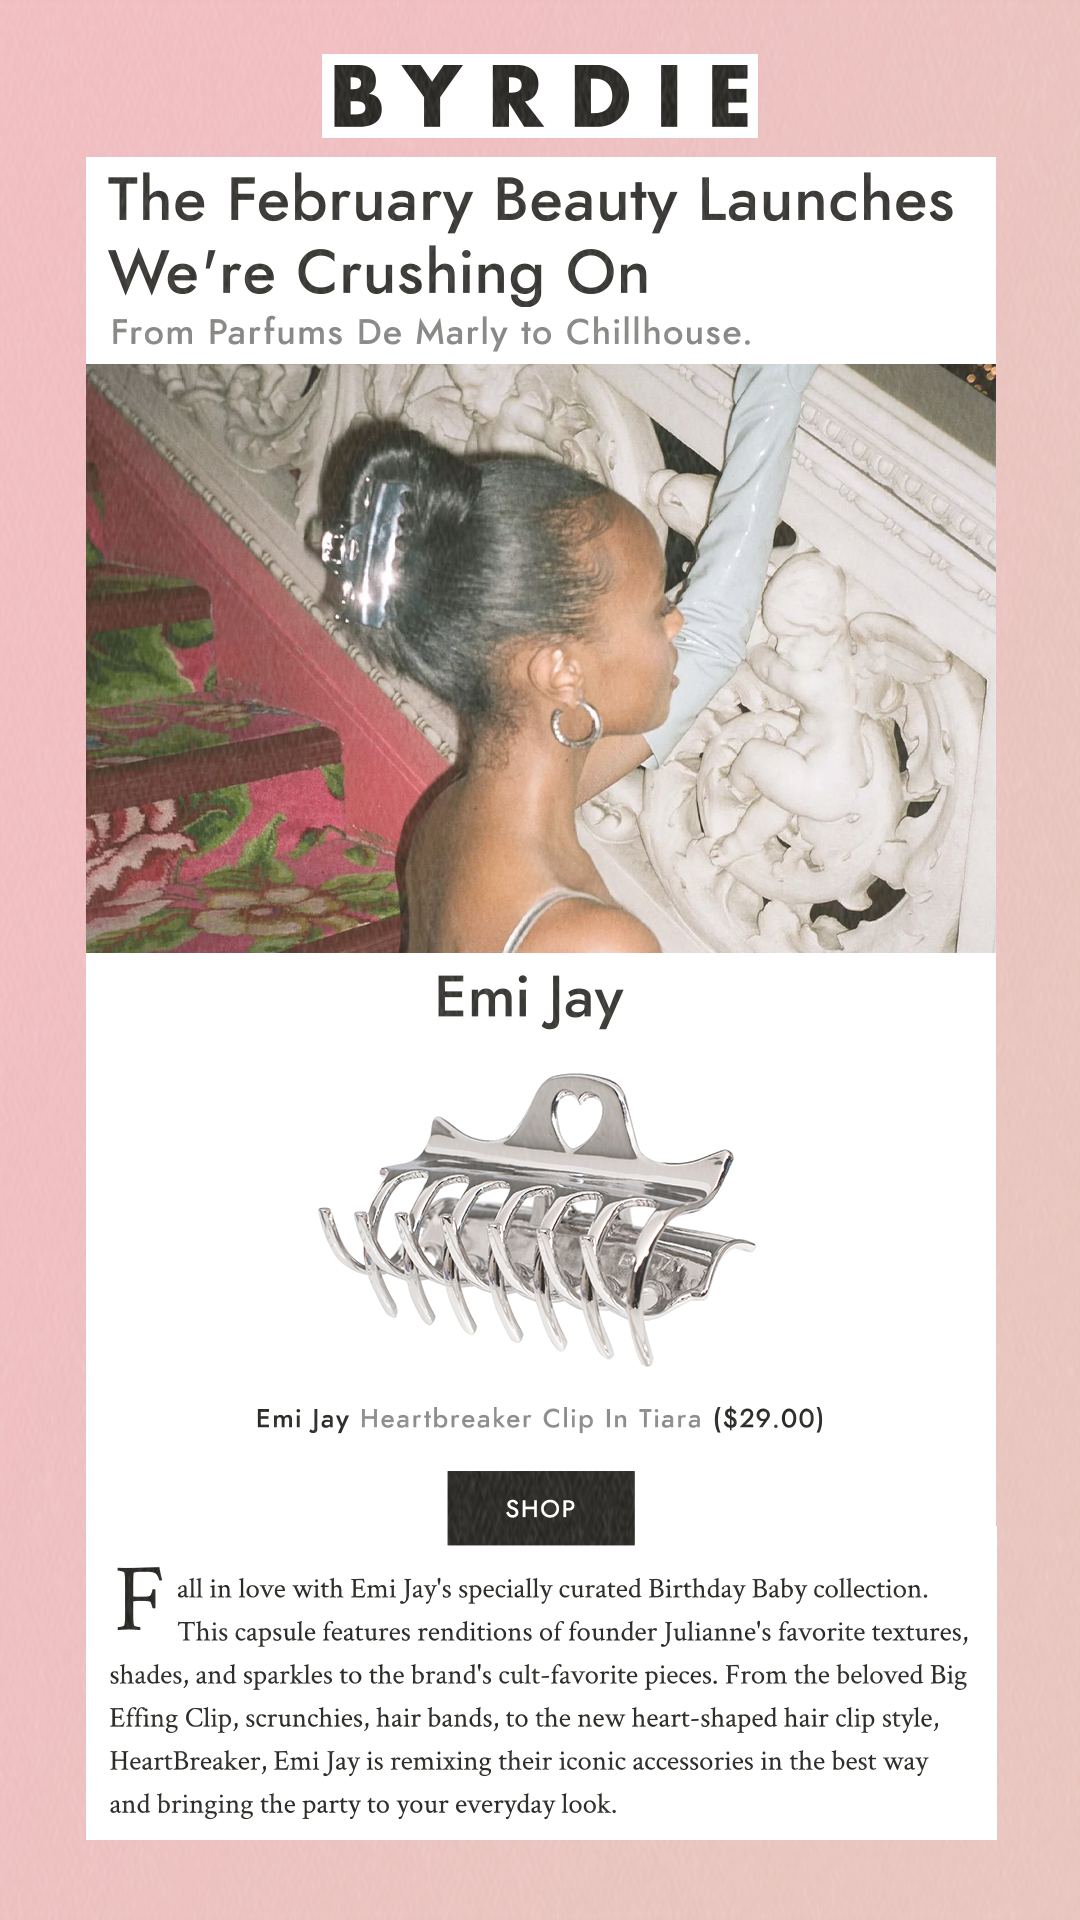 The February Beauty Launches We're Crushing On From Parfums De Marly to Chillhouse. Emi Jay Emi Jay Heartbreaker Clip In Tiara $29.00 Fall in love with Emi Jay's specially curated Birthday Baby collection. This capsule features renditions of founder Julianne's favorite textures, shades, and sparkles to the brand's cult-favorite pieces. From the beloved Big Effing Clip, scrunchies, hair bands, to the new heart-shaped hair clip style, HeartBreaker, Emi Jay is remixing their iconic accessories in the best way and bringing the party to your everyday look.